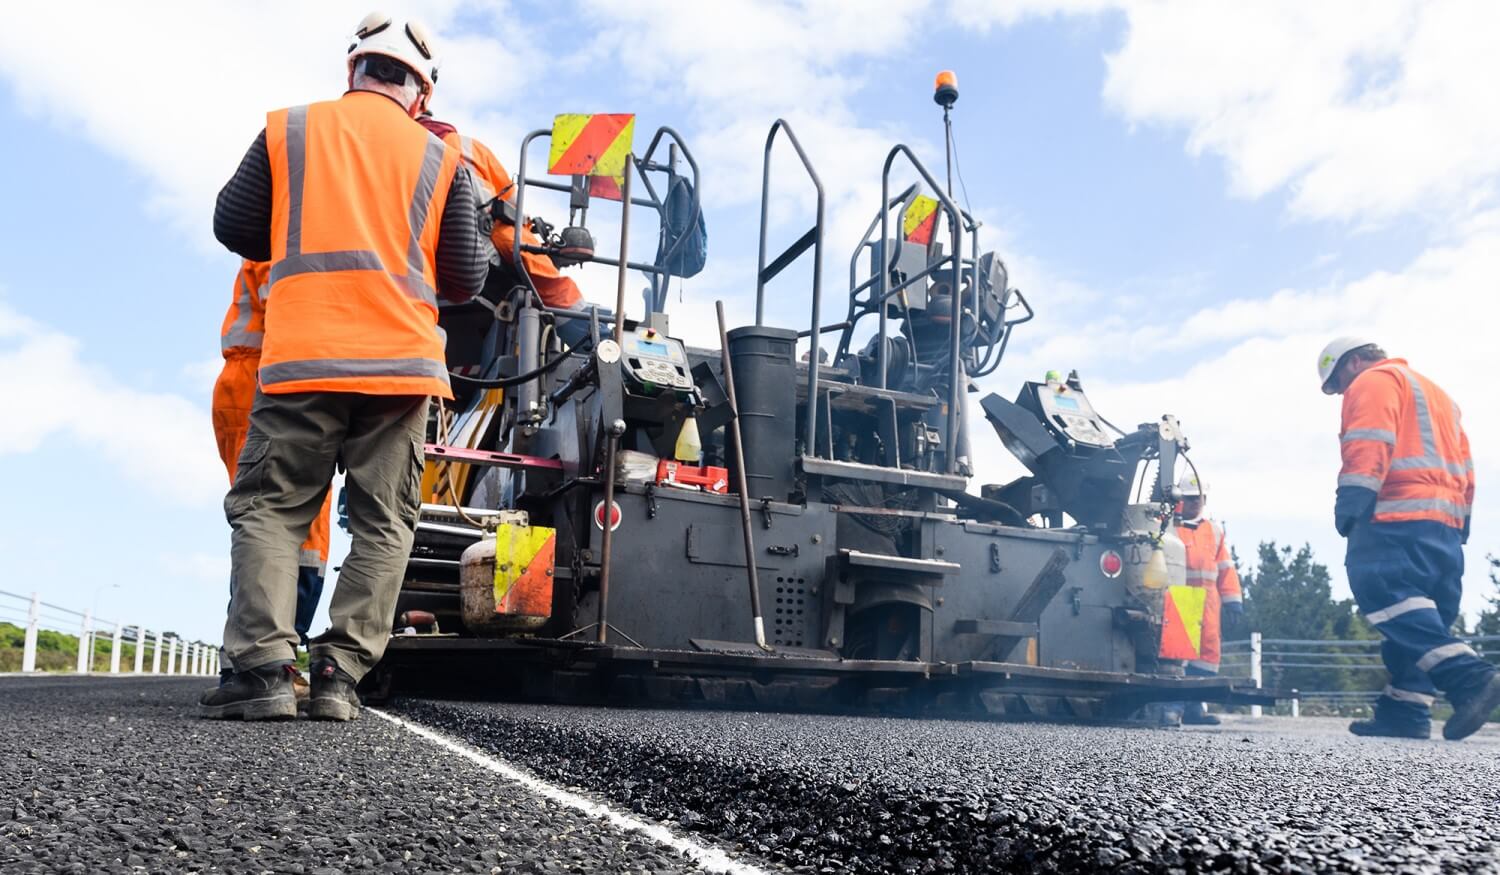 Road maintenance workers using machinery on road